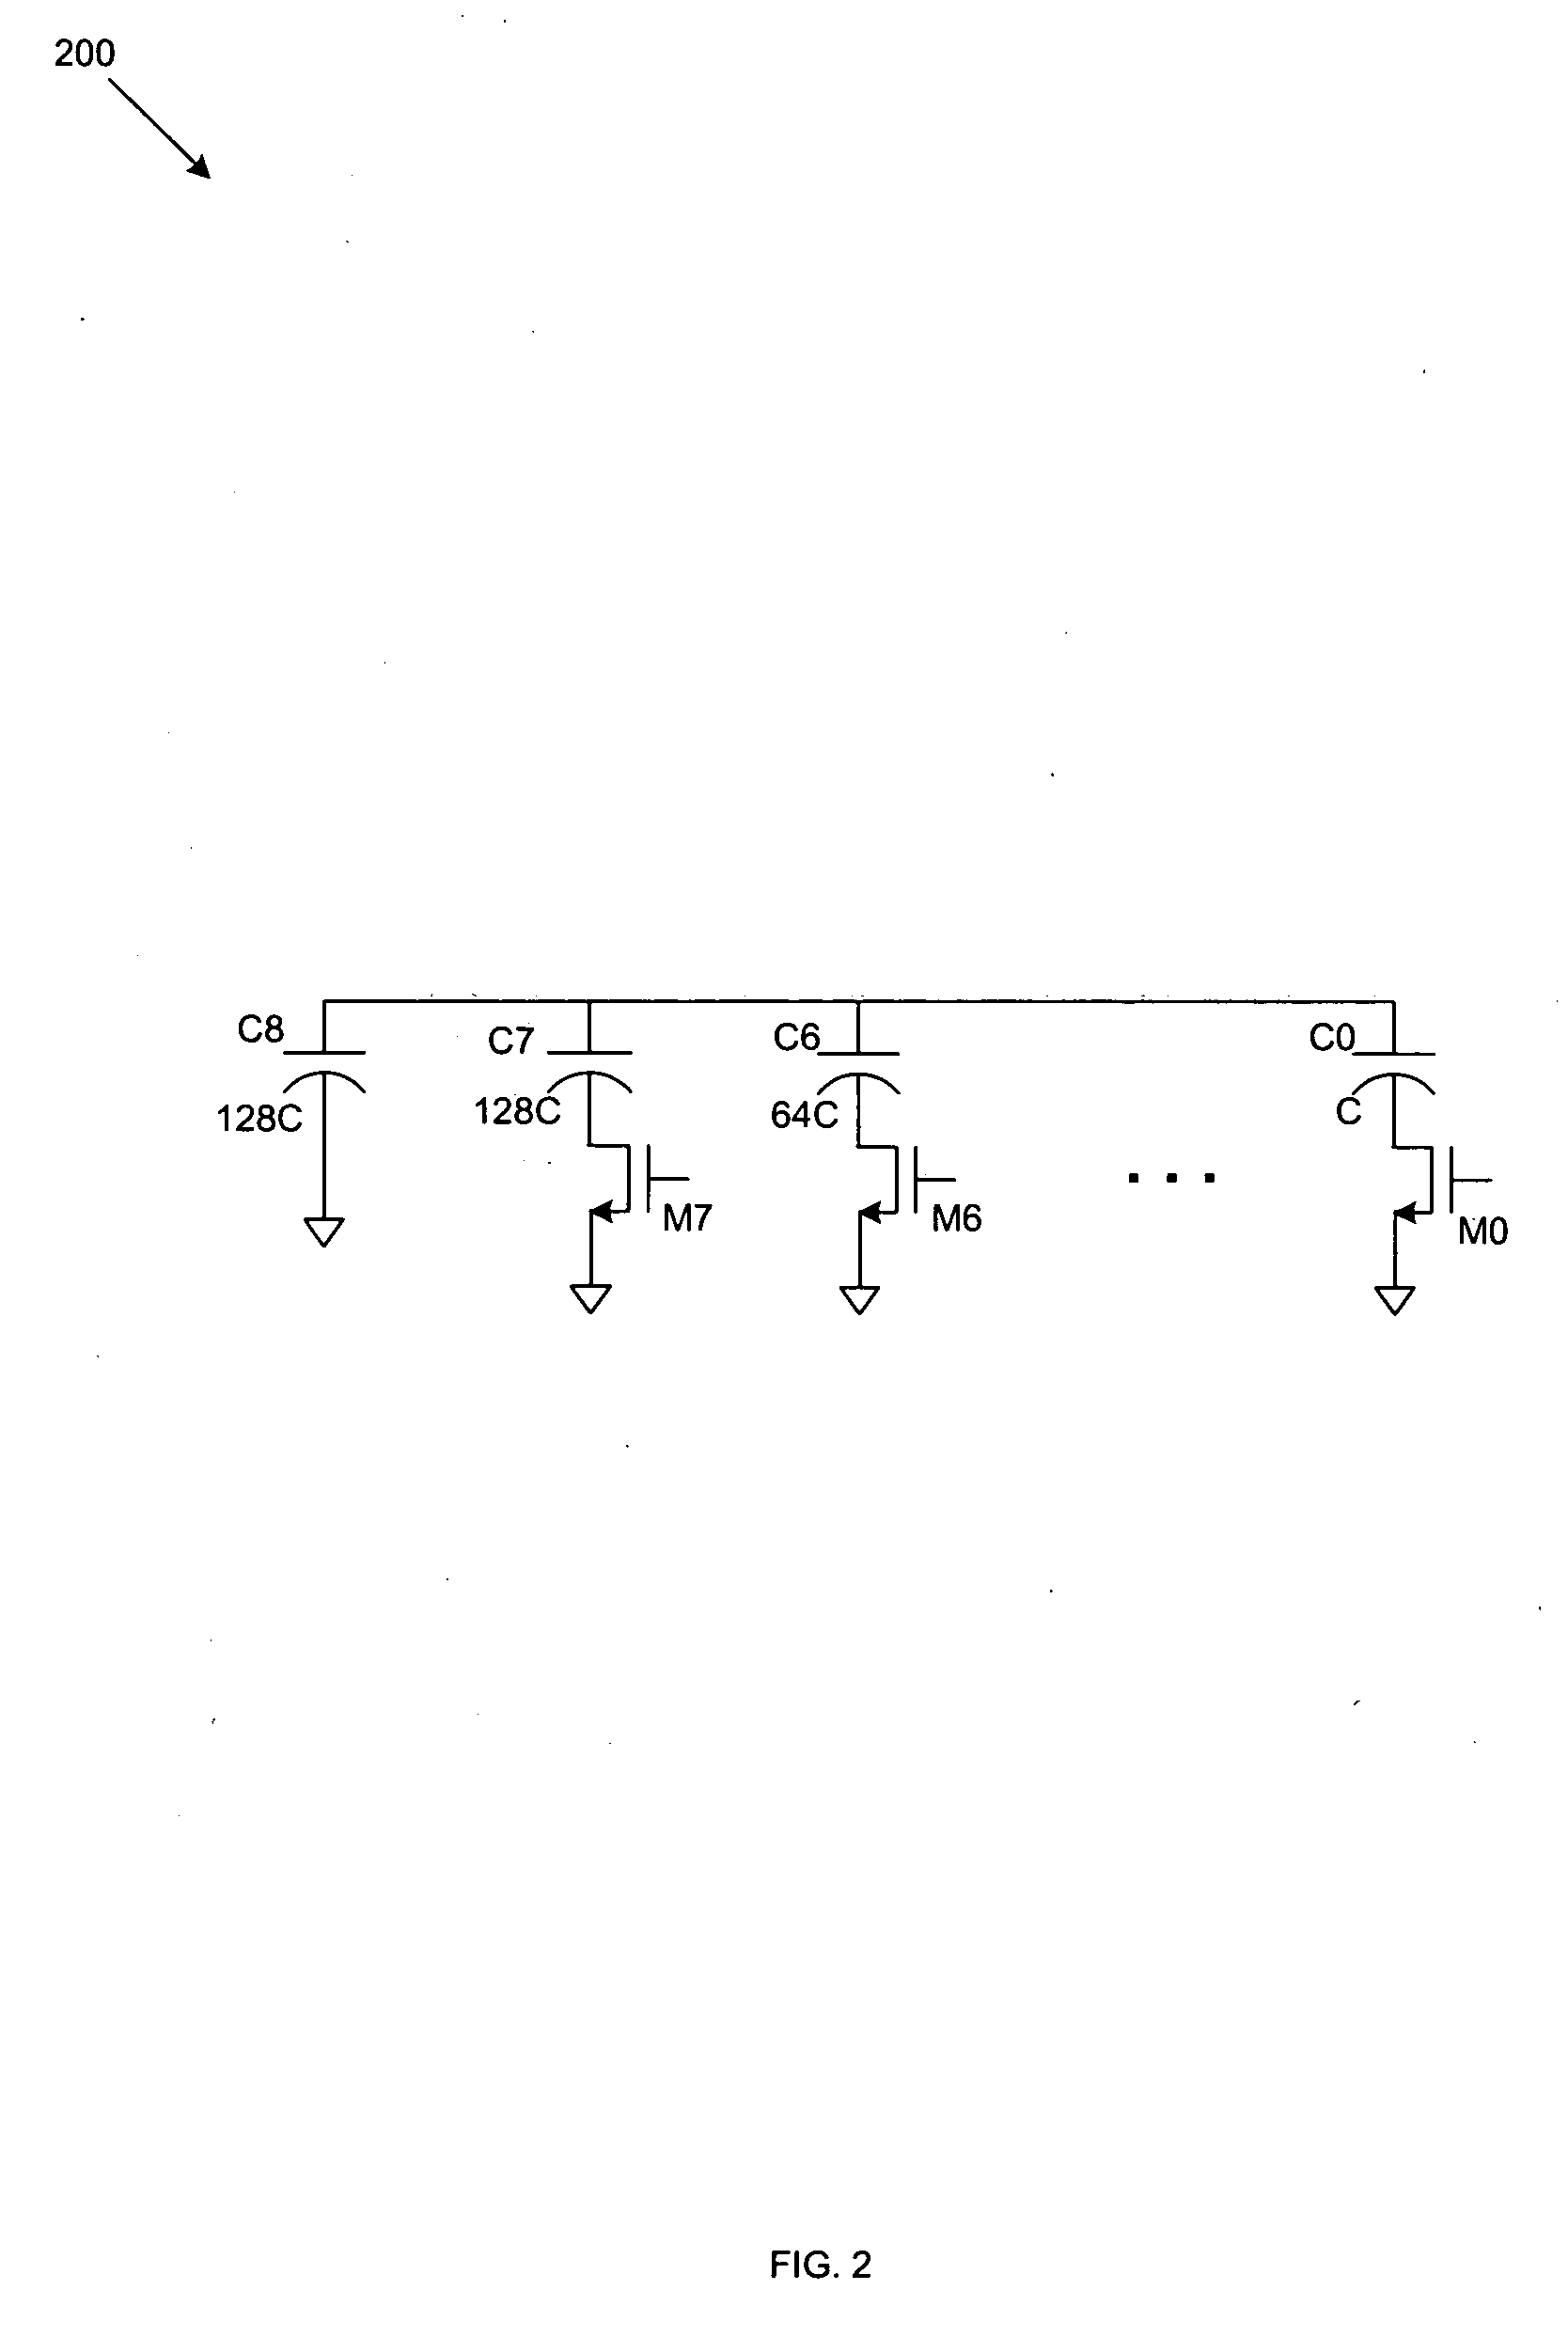 Method and system for a differential switched capacitor array for a voltage controlled oscillator (VCO) or a local oscillator (LO) buffer